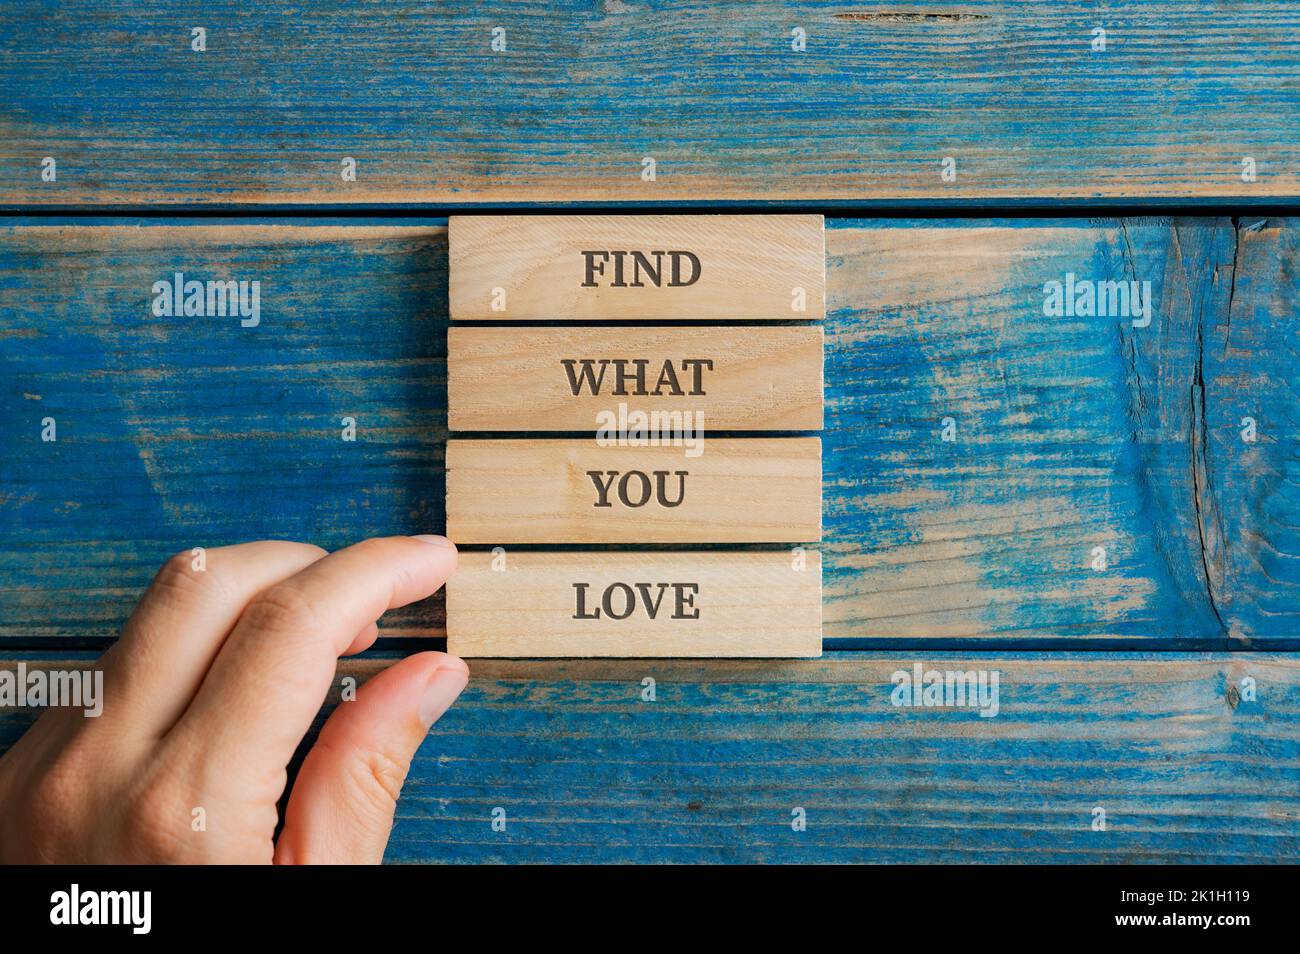 Male hand assembling a Find what you love sign written on four stacked wooden pegs placed on textured blue wooden boards. Stock Photo